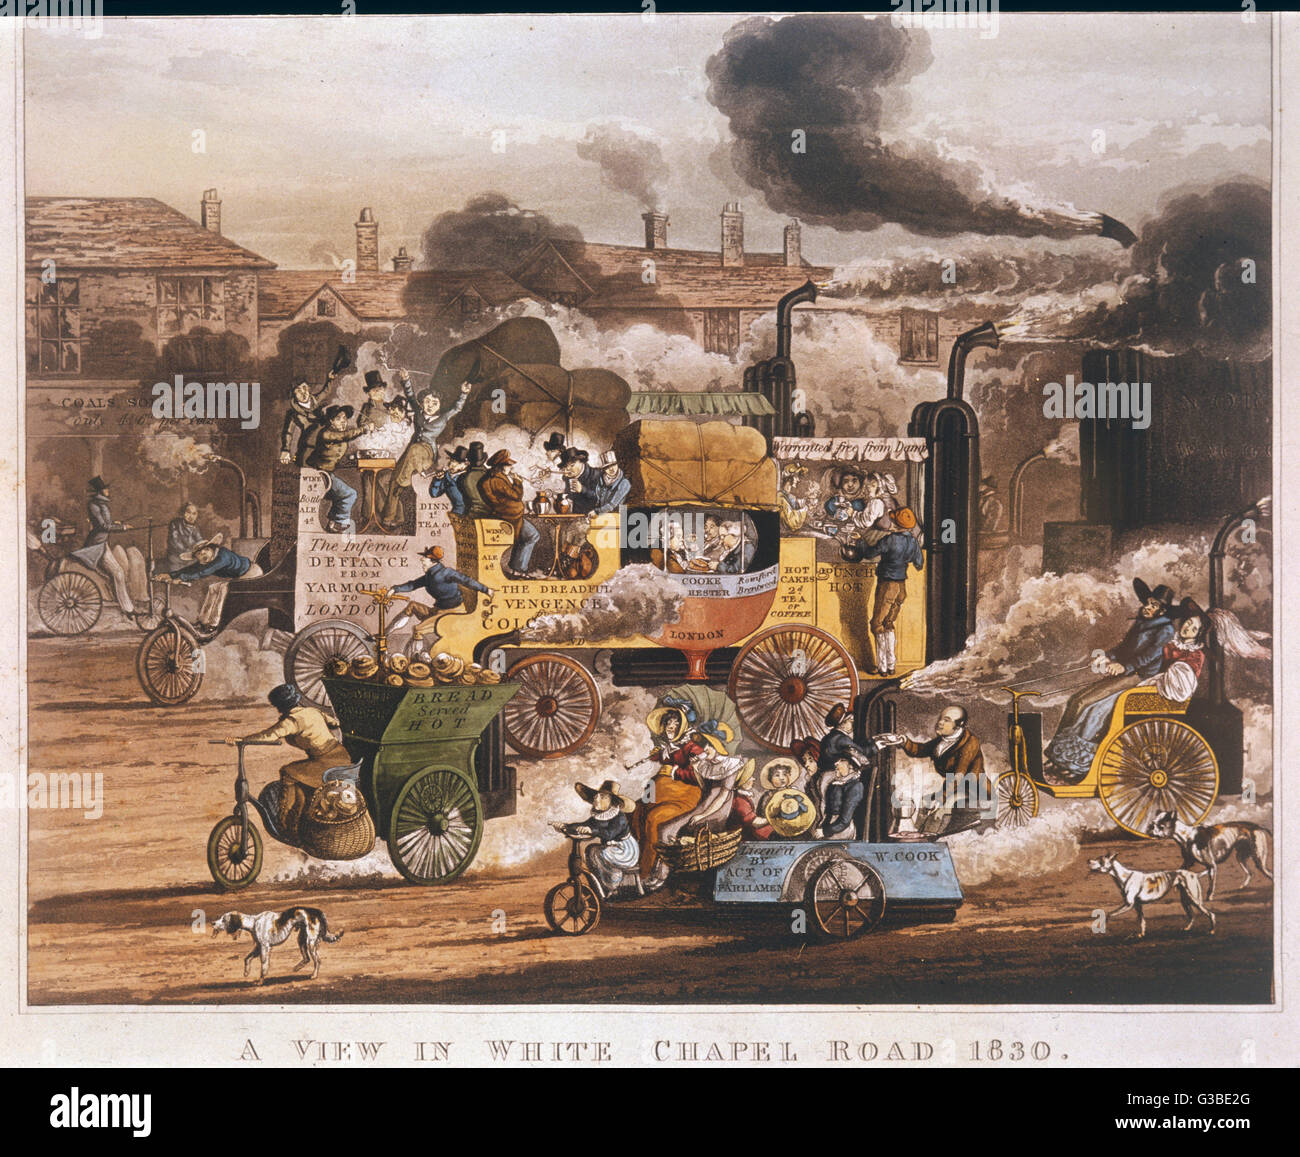 The widespread activity,  seeking to harness steam power  to road transport, is  satirised in this view of the  Whitechapel Road where horse  drawn vehicles are no more...     Date: 1830 Stock Photo